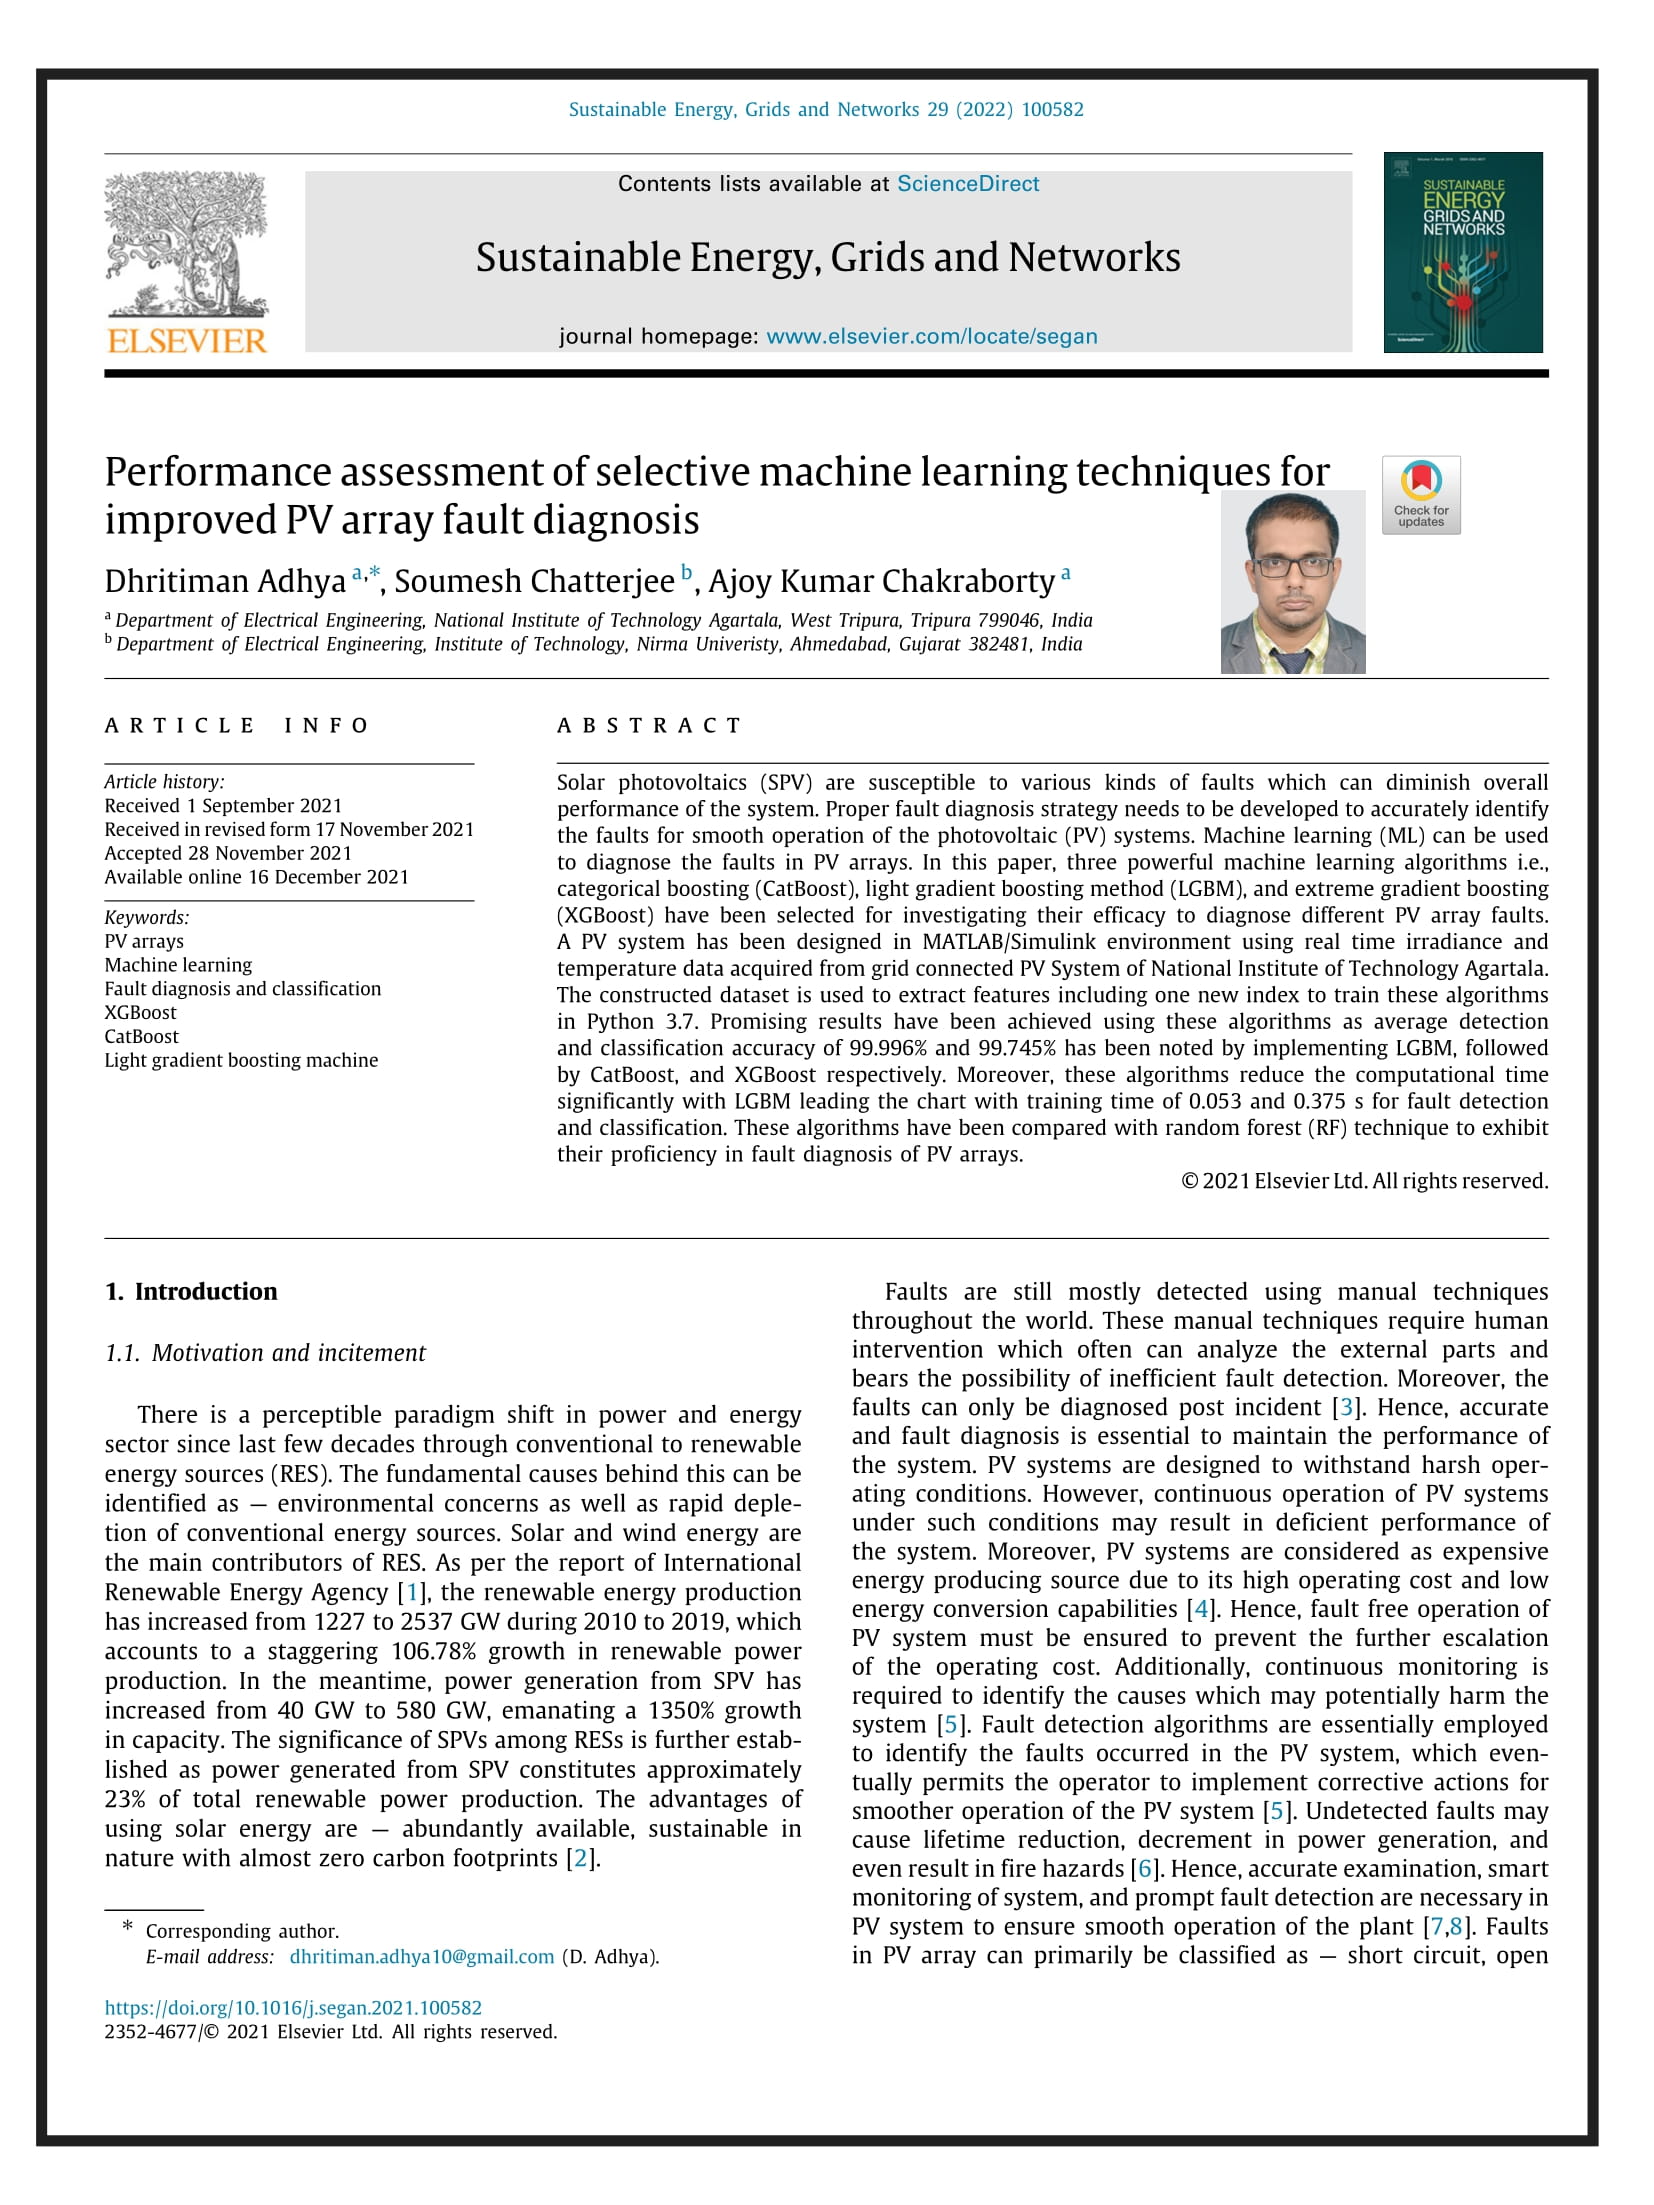 Performance assessment of selective machine learning techniques for improved PV array fault diagnosis